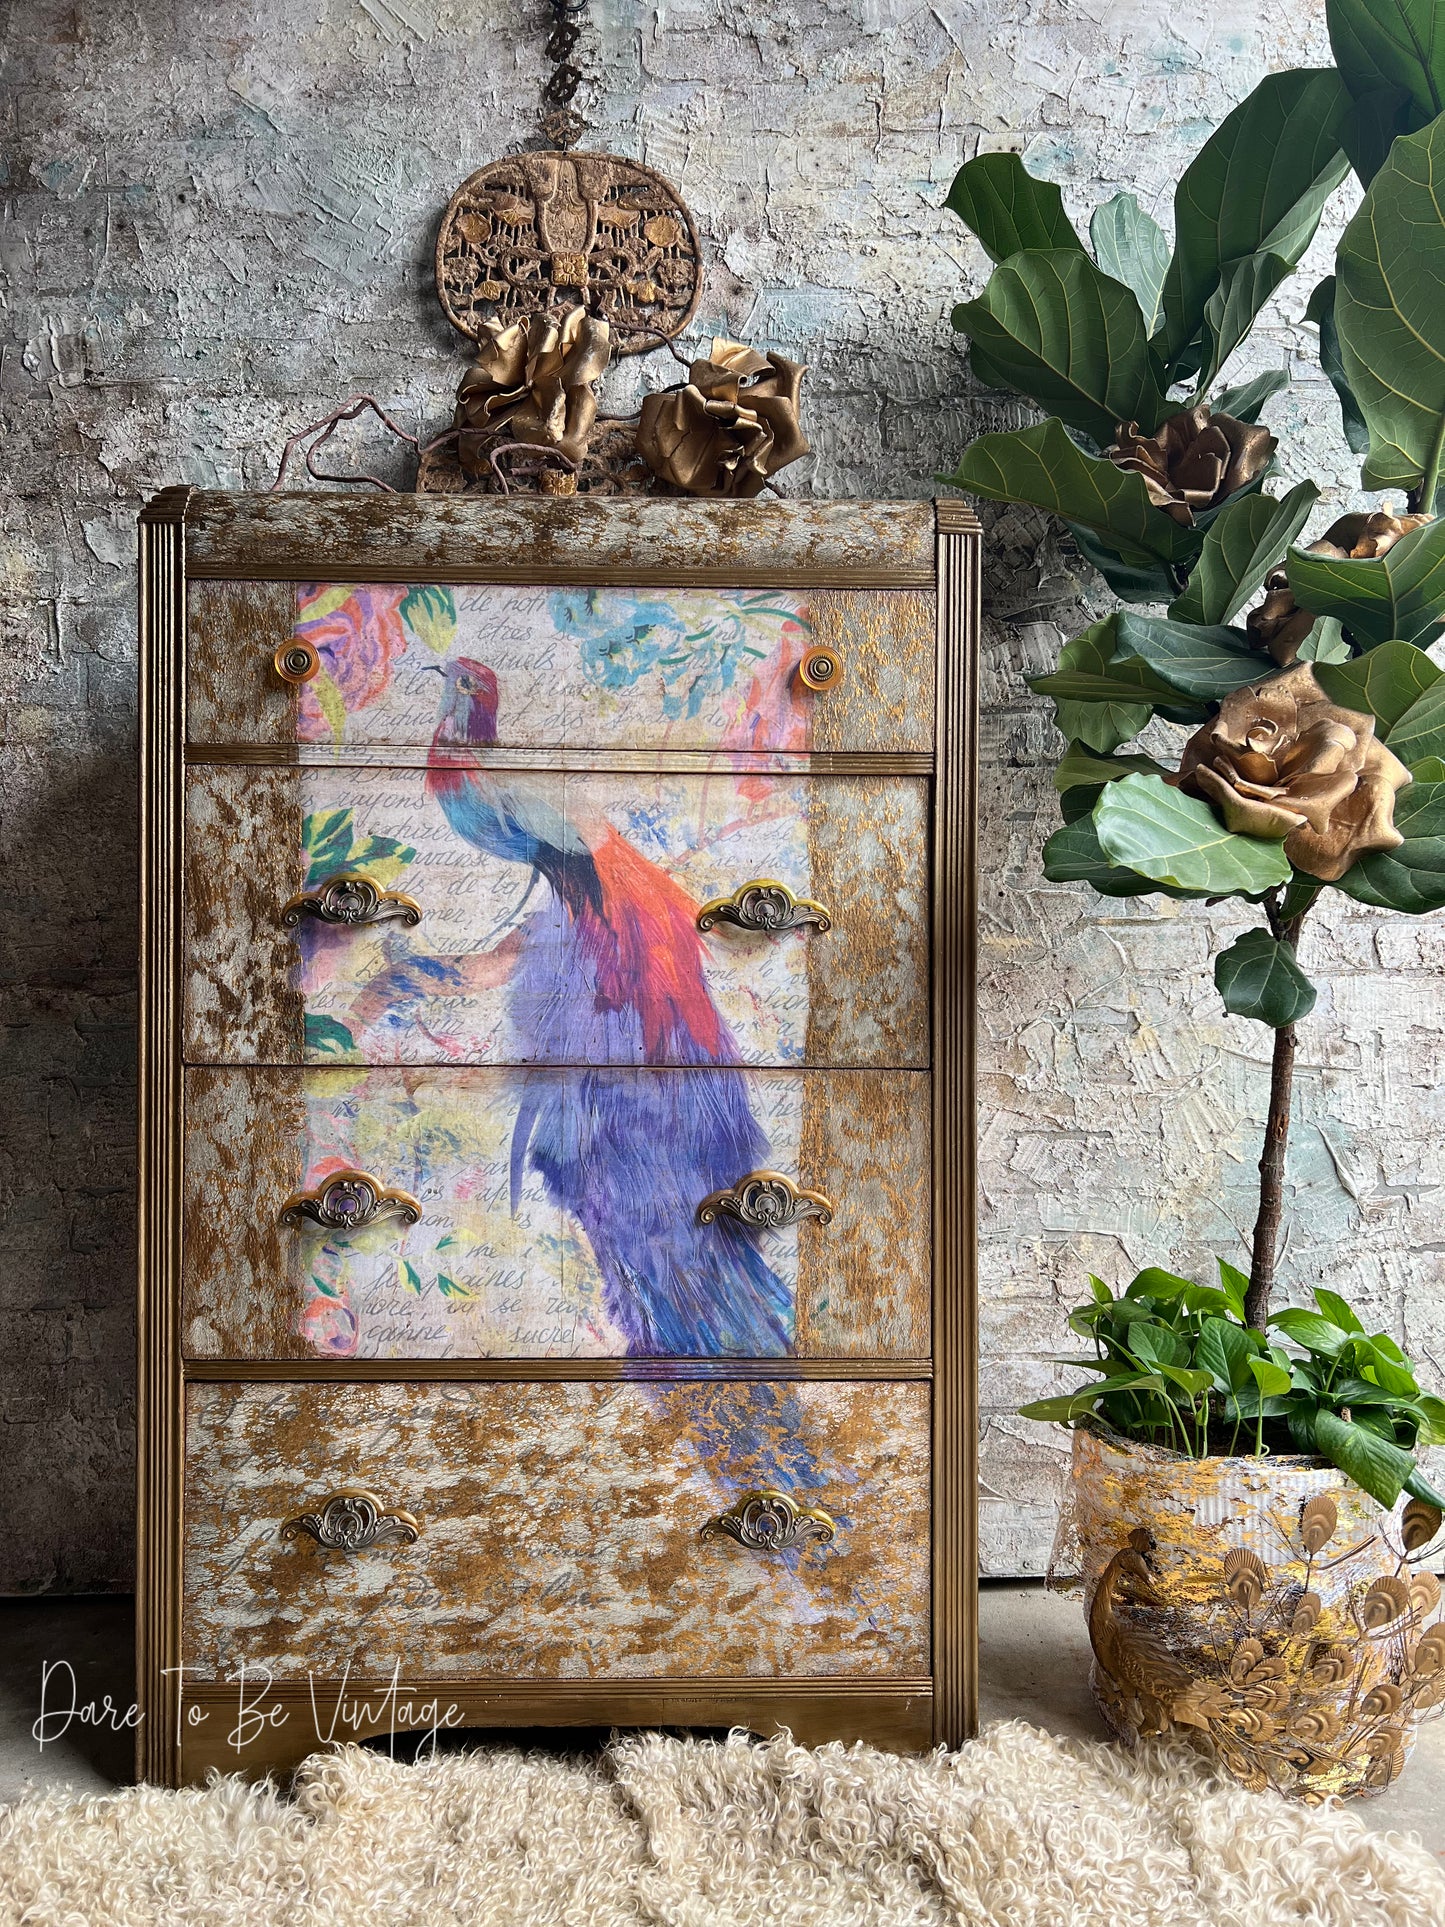 ‘Bird Of A Paradise’ Hand Painted Whimsical Bird Floral Dresser